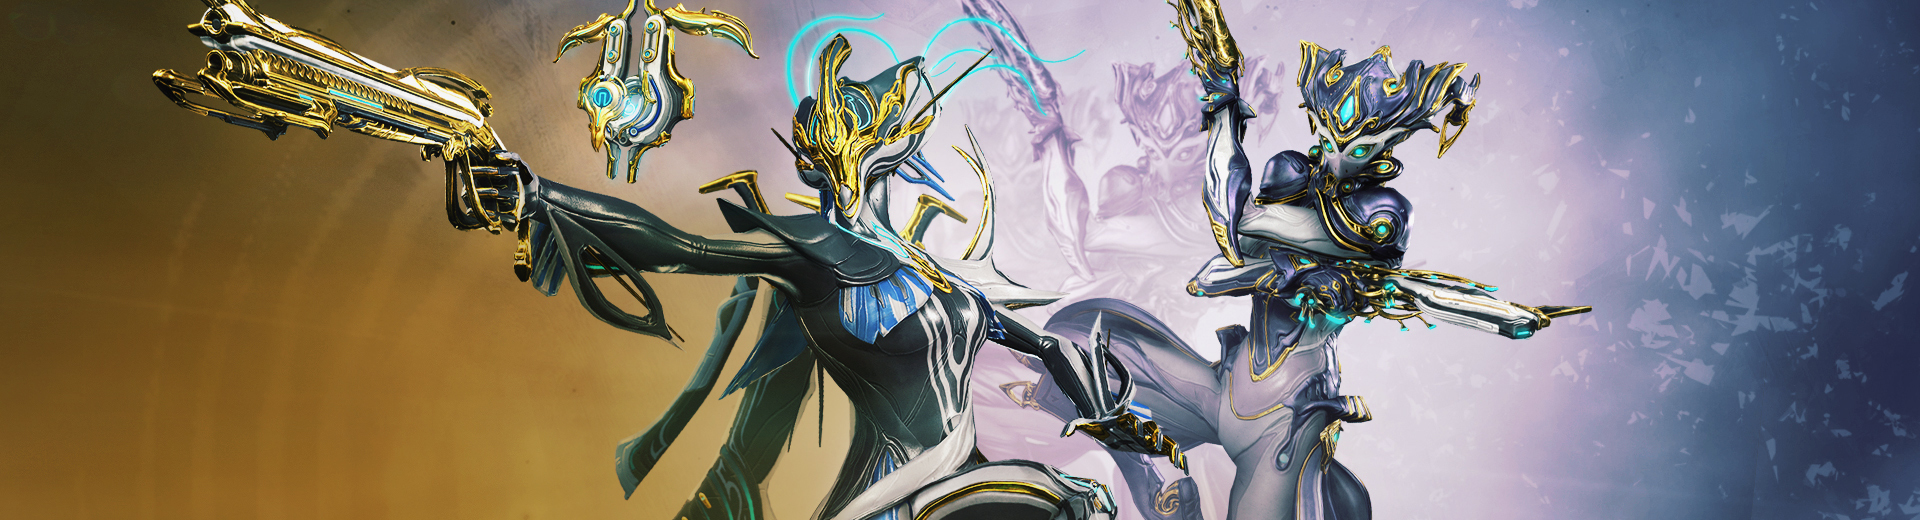 Digital Extremes - DOMINATE THE BATTLEFIELD WITH KHORA PRIME ACCESS